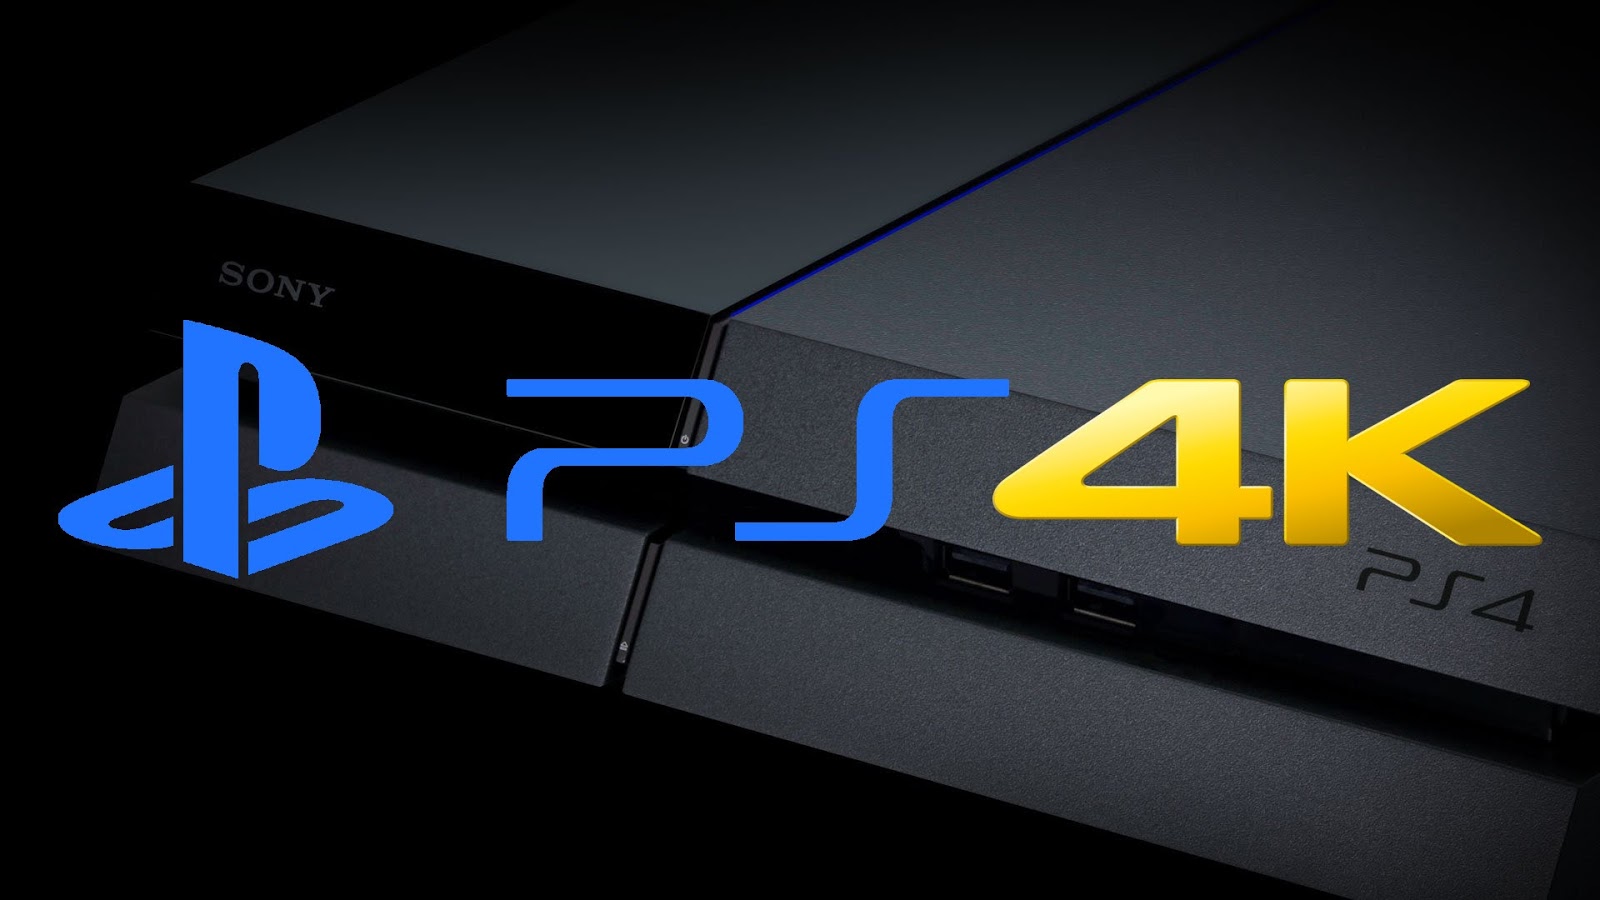 Ps4 3d. Neo ps5. PLAYSTATION 4.